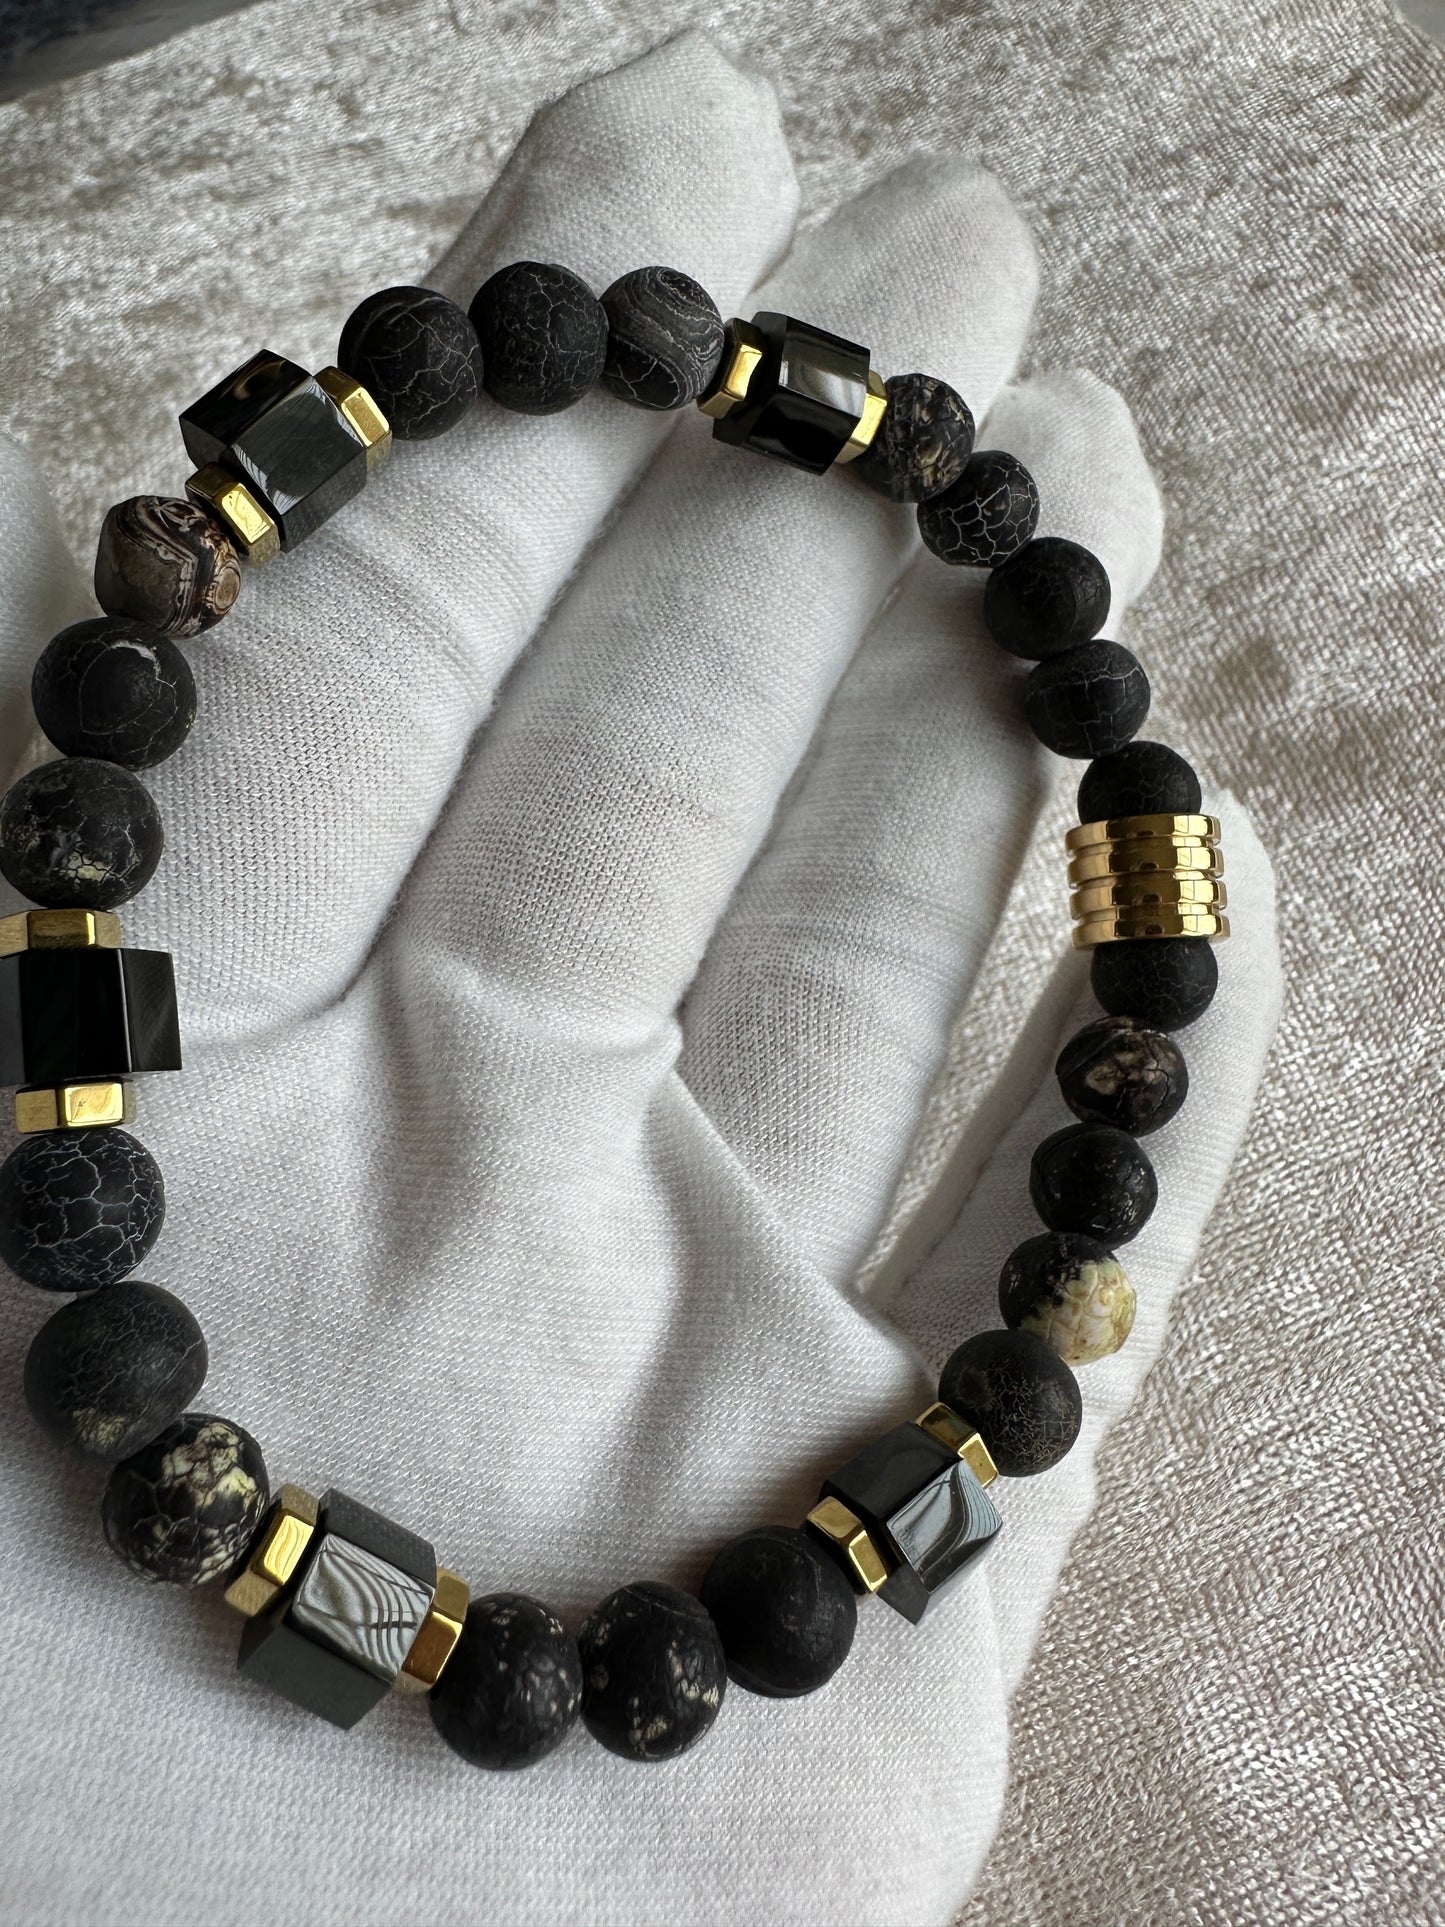 Black and Gold Fire Agate Bracelet